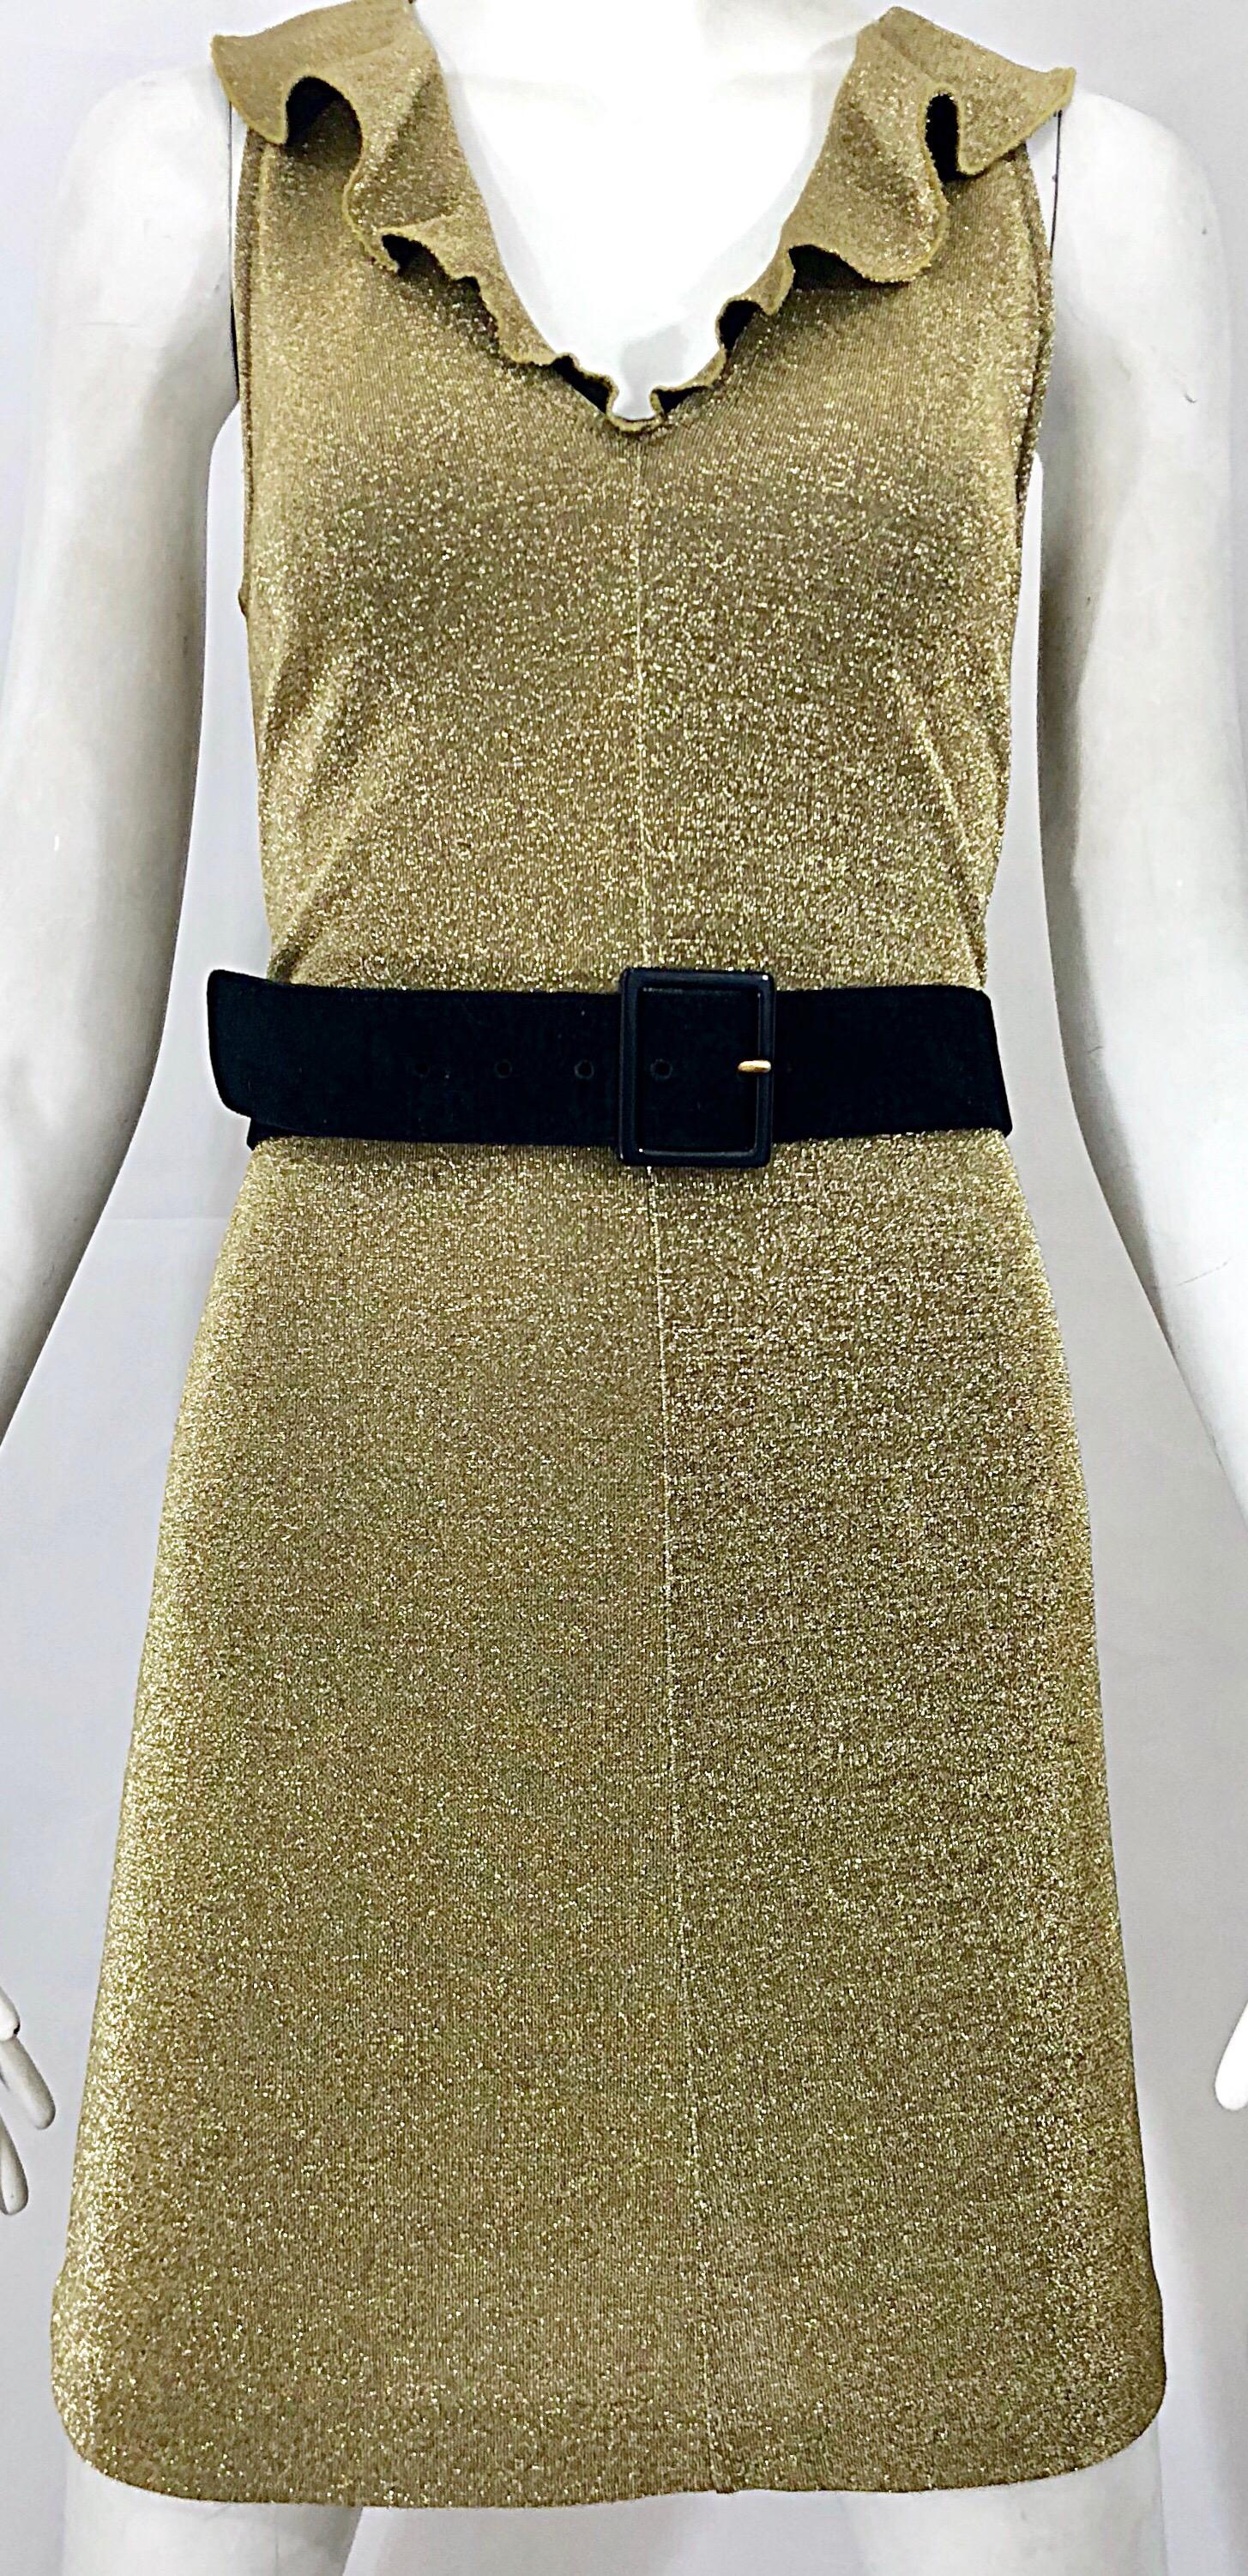 Margano 1990s Italian Gold Metallic Sexy Jersey Vintage Bodycon 90s Dress In Excellent Condition For Sale In San Diego, CA